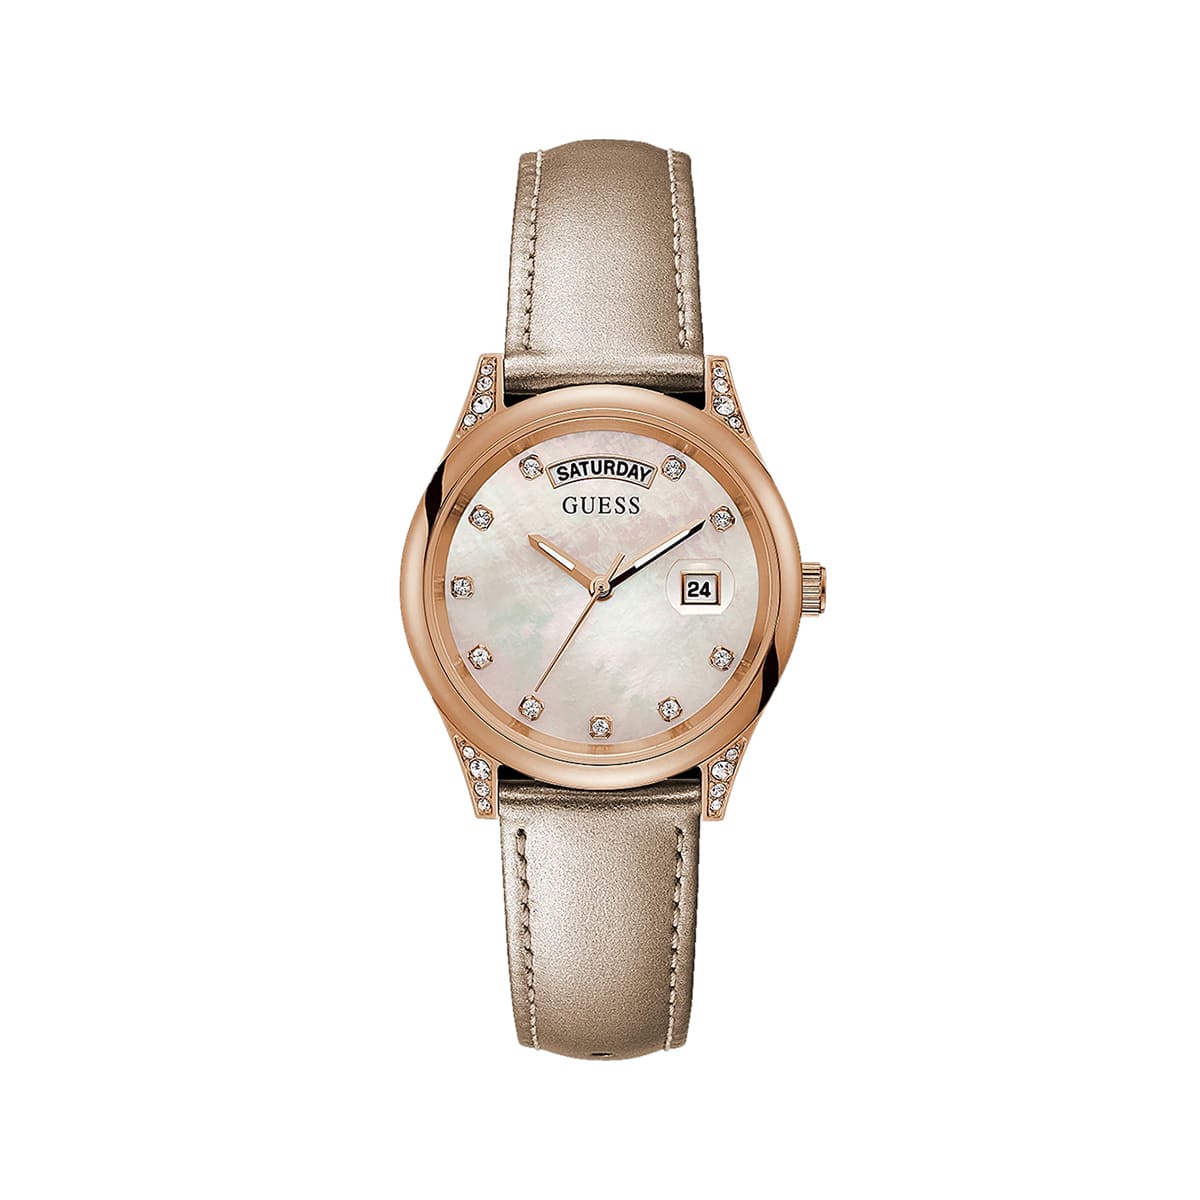 MONTRE GUESS Only Time FEMME CUIR